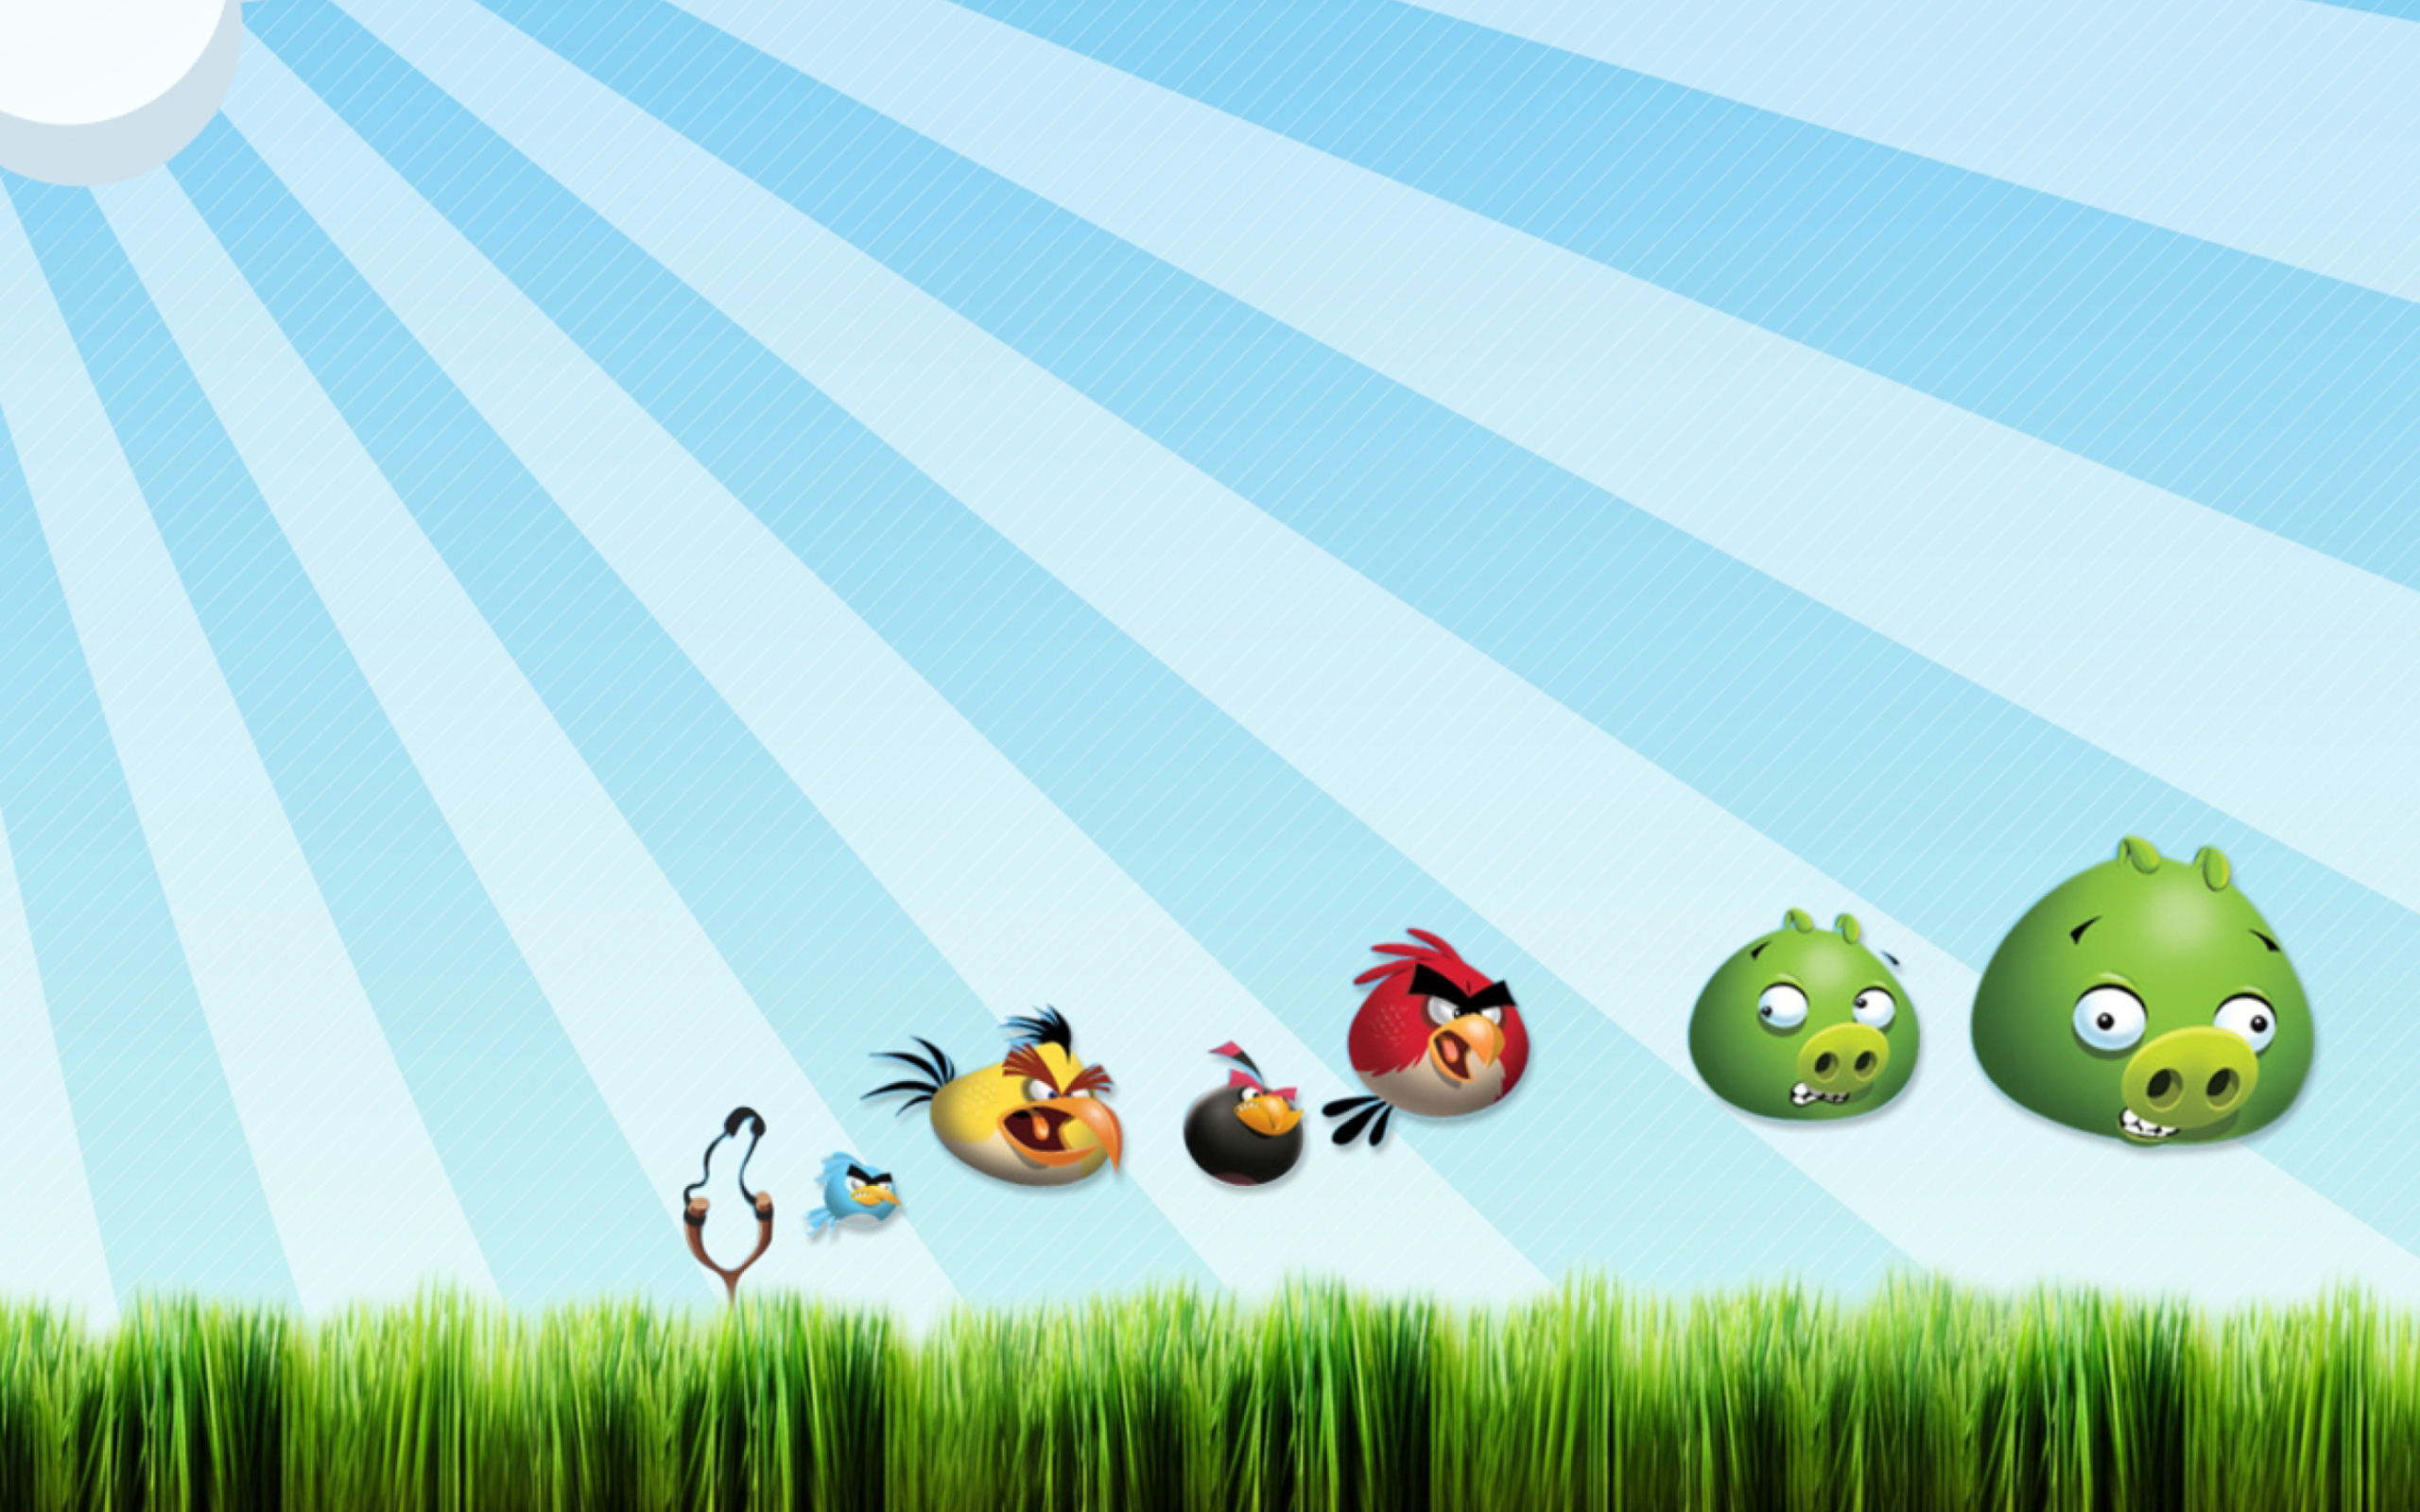 Angry Birds Bad Pigs wallpaper 2560x1600